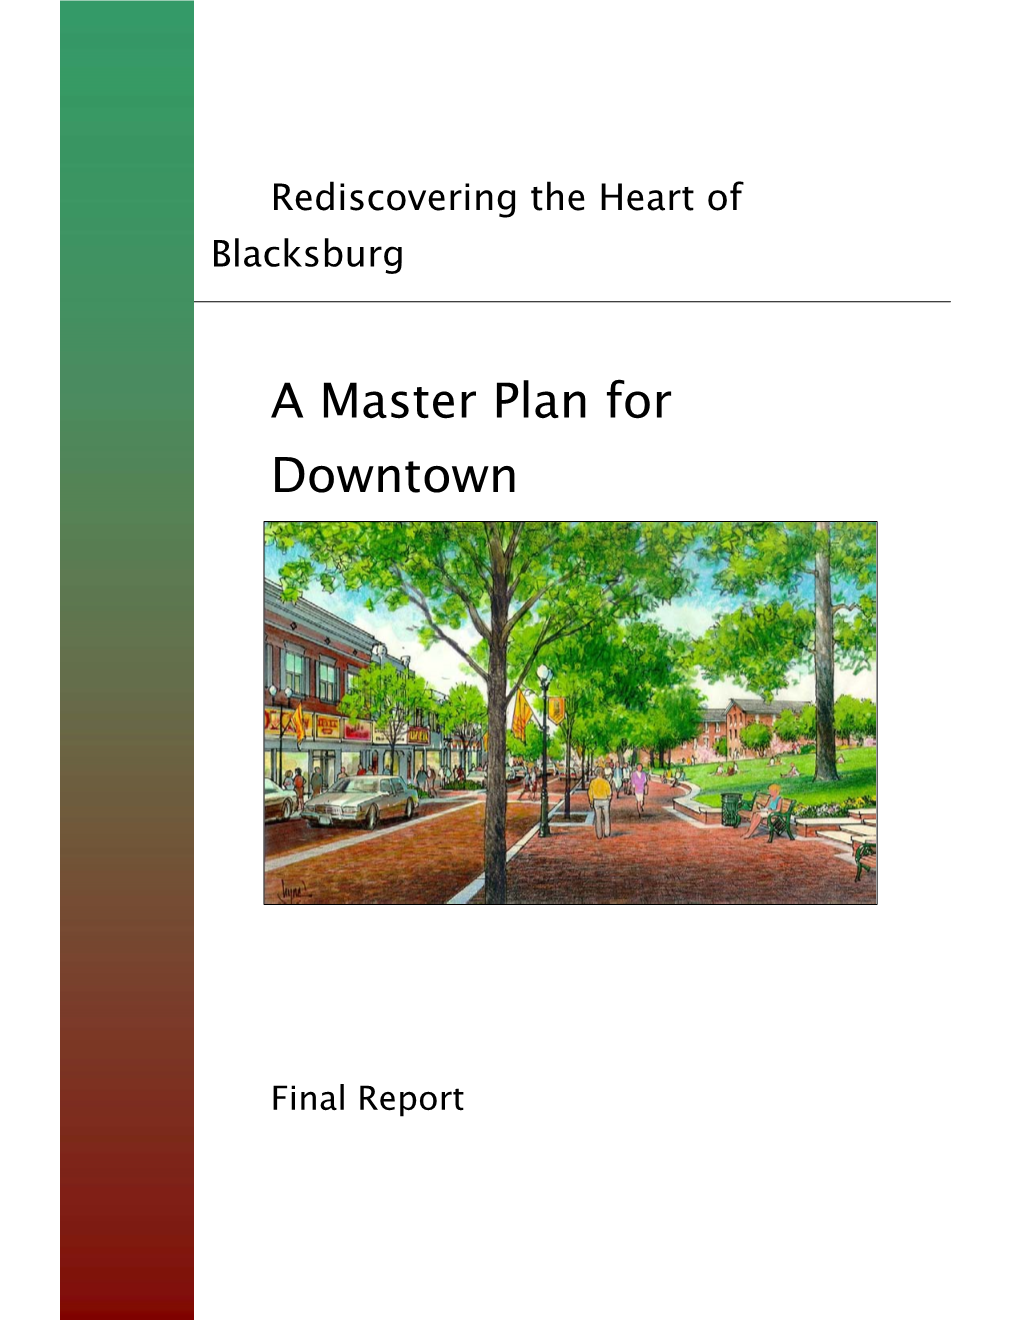 A Master Plan for Downtown